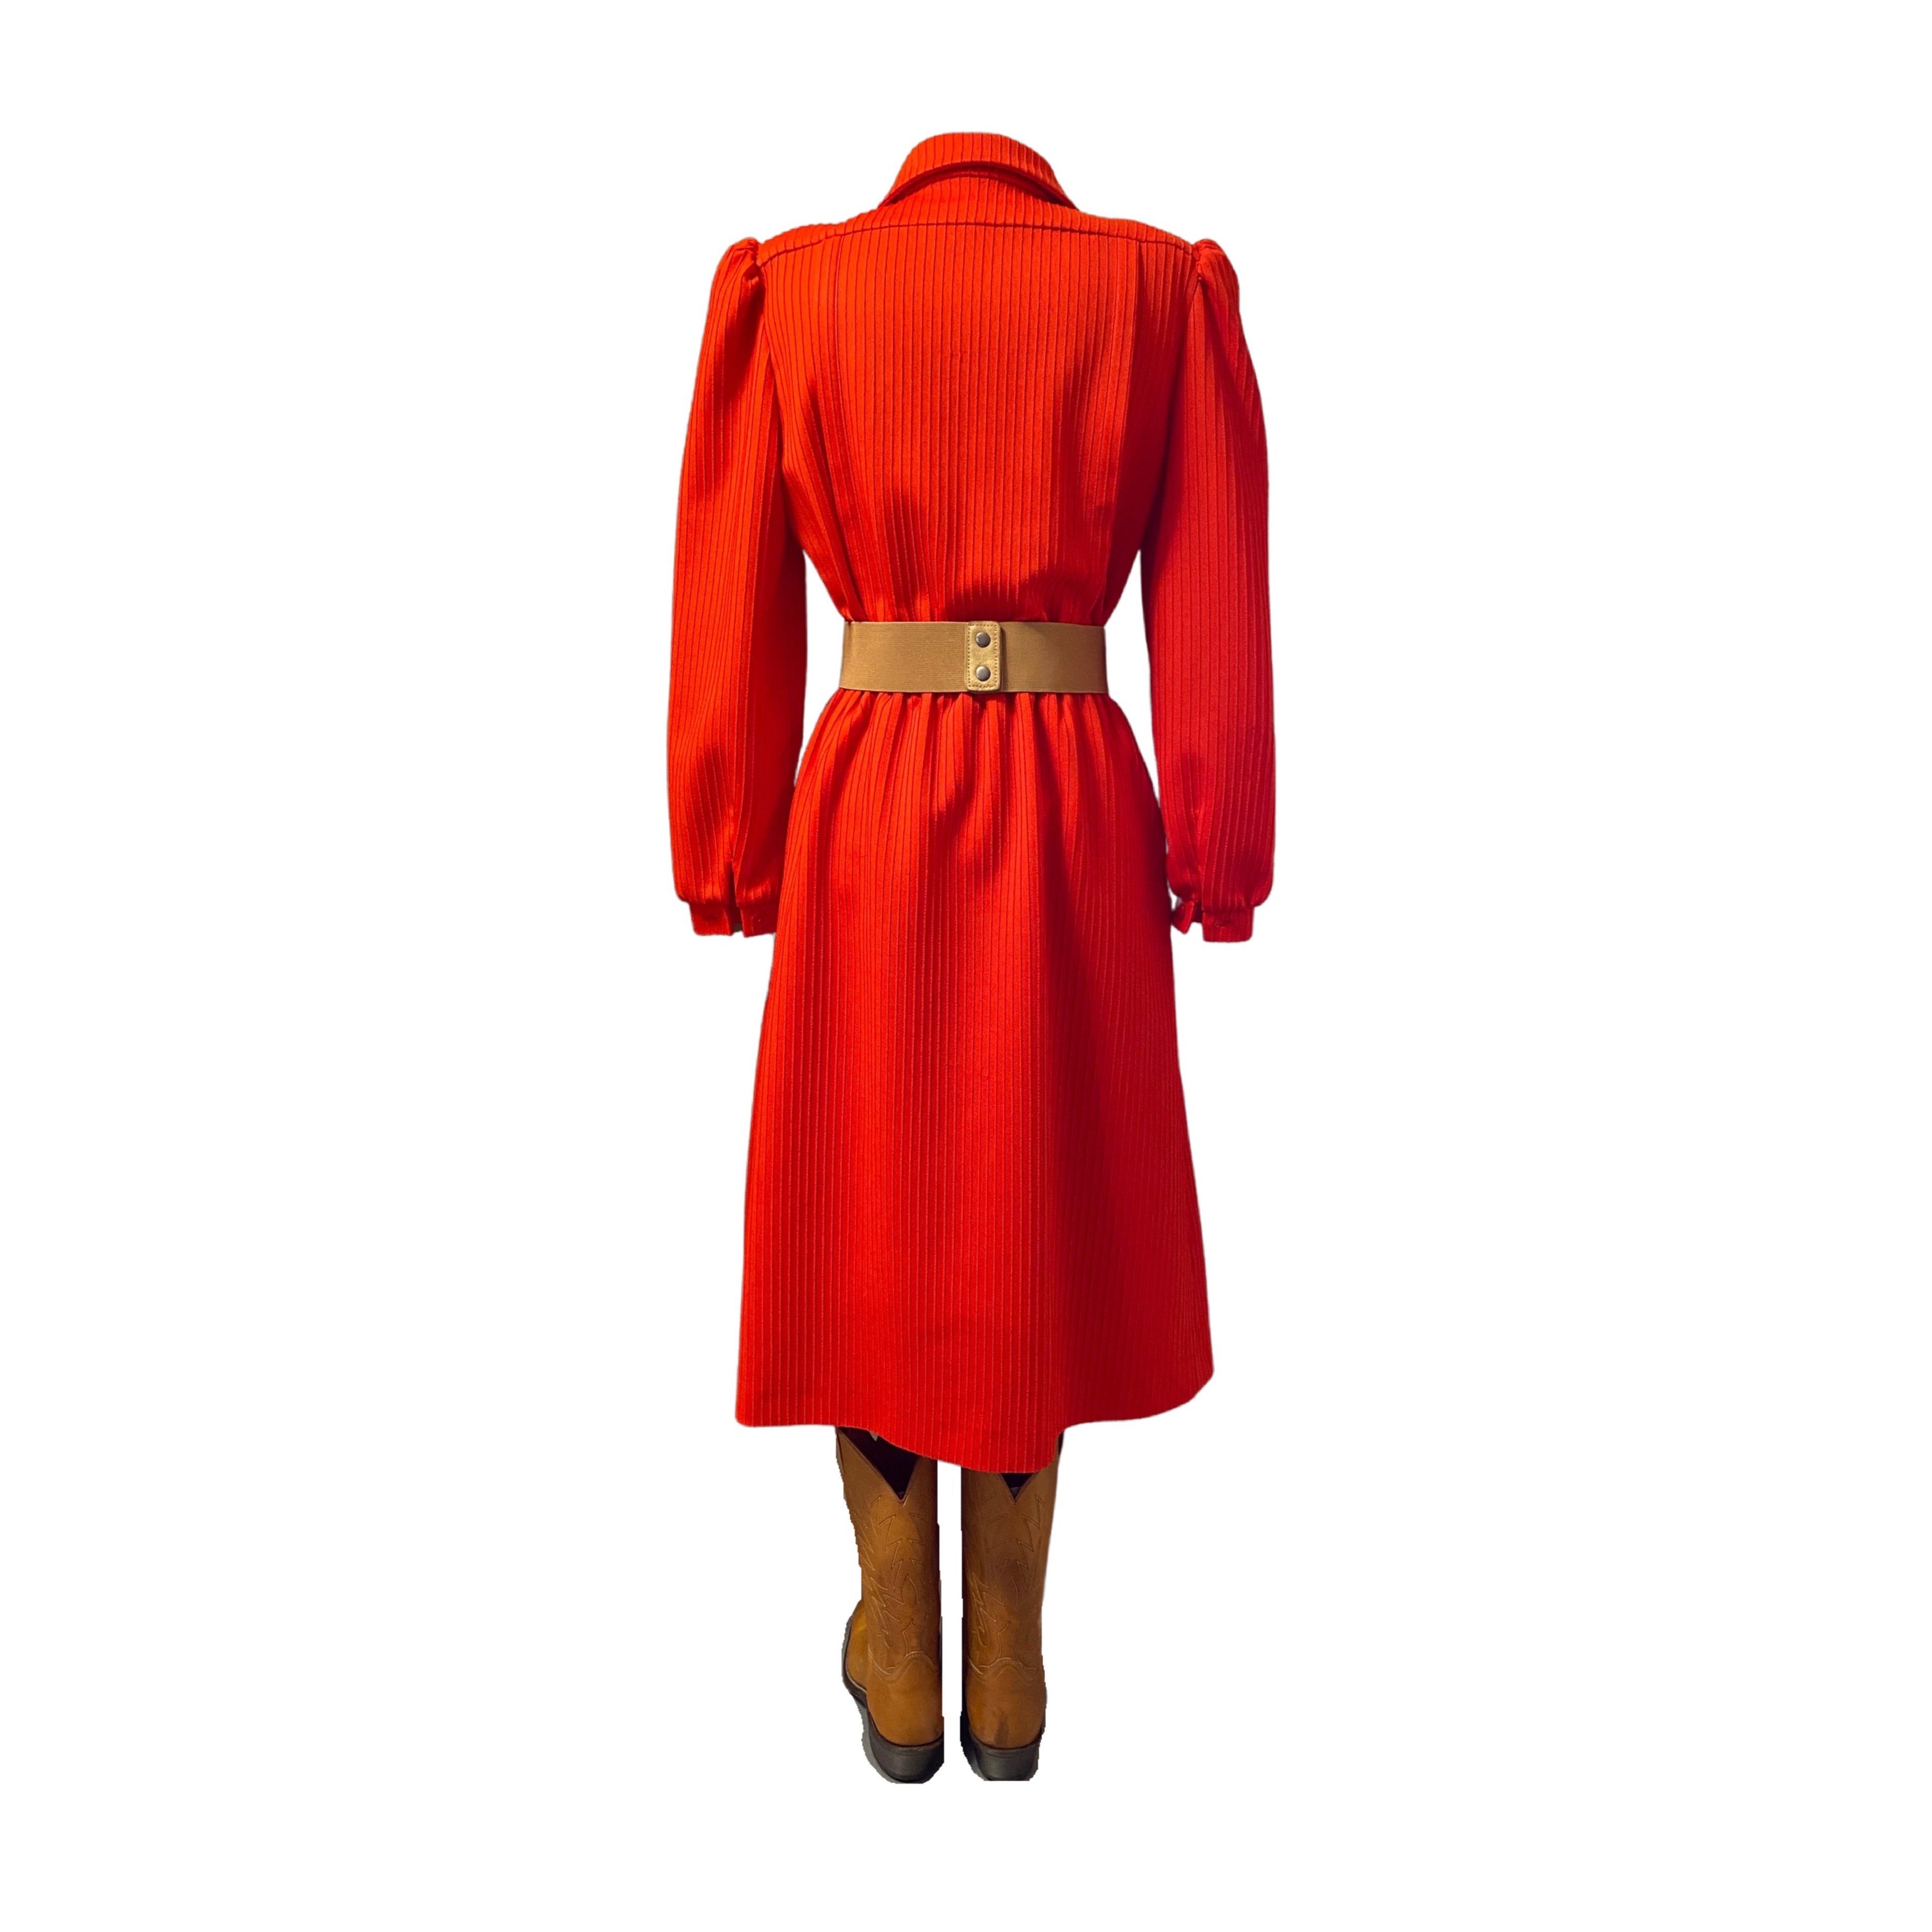 LADY IN RED PUFF SLEEVE DRESS